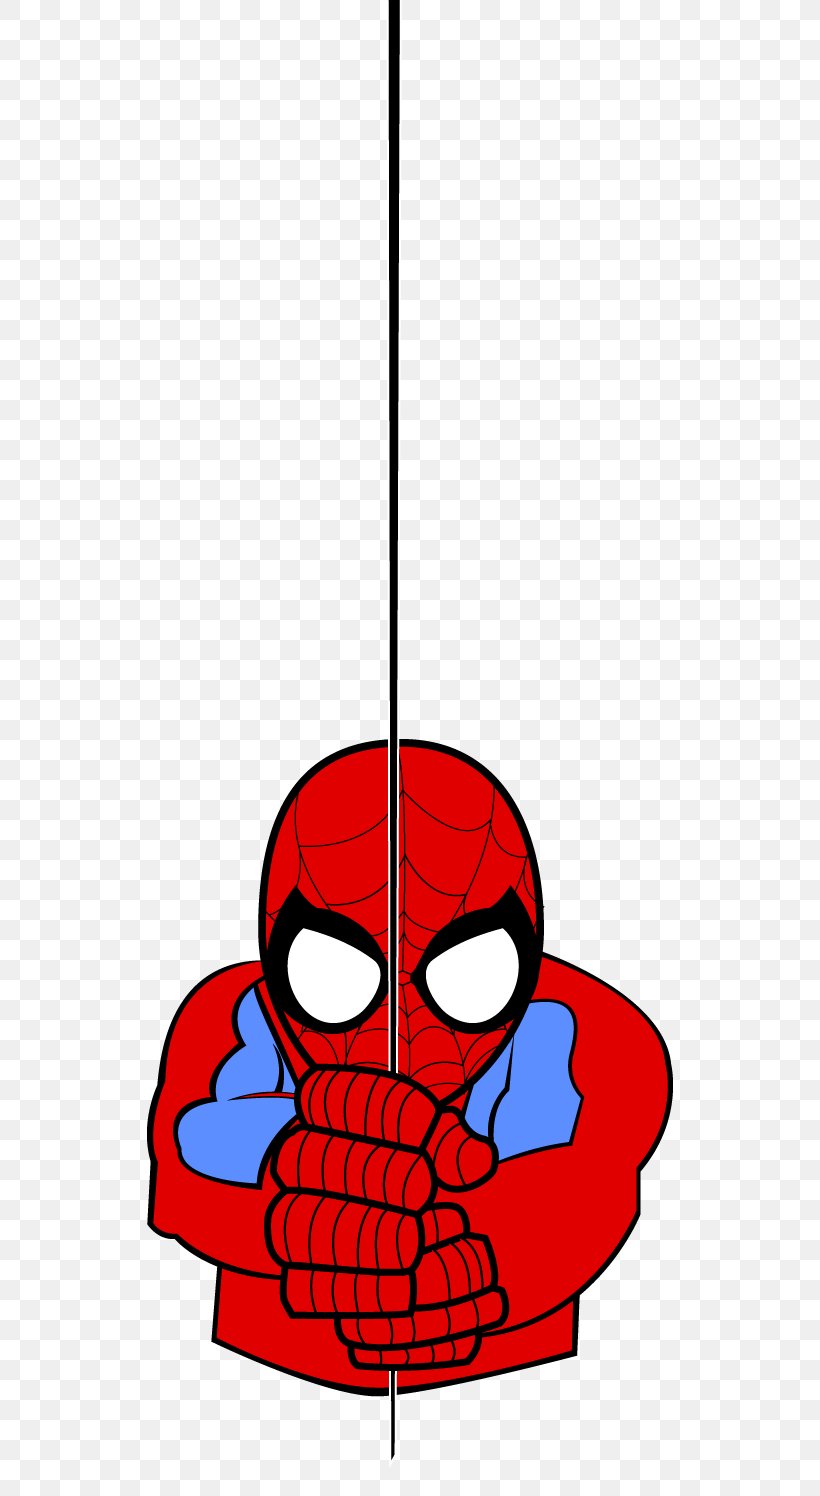 Spider-Man In Television Animation Clip Art, PNG, 526x1496px, Spiderman, Animated Series, Animation, Art, Cartoon Download Free